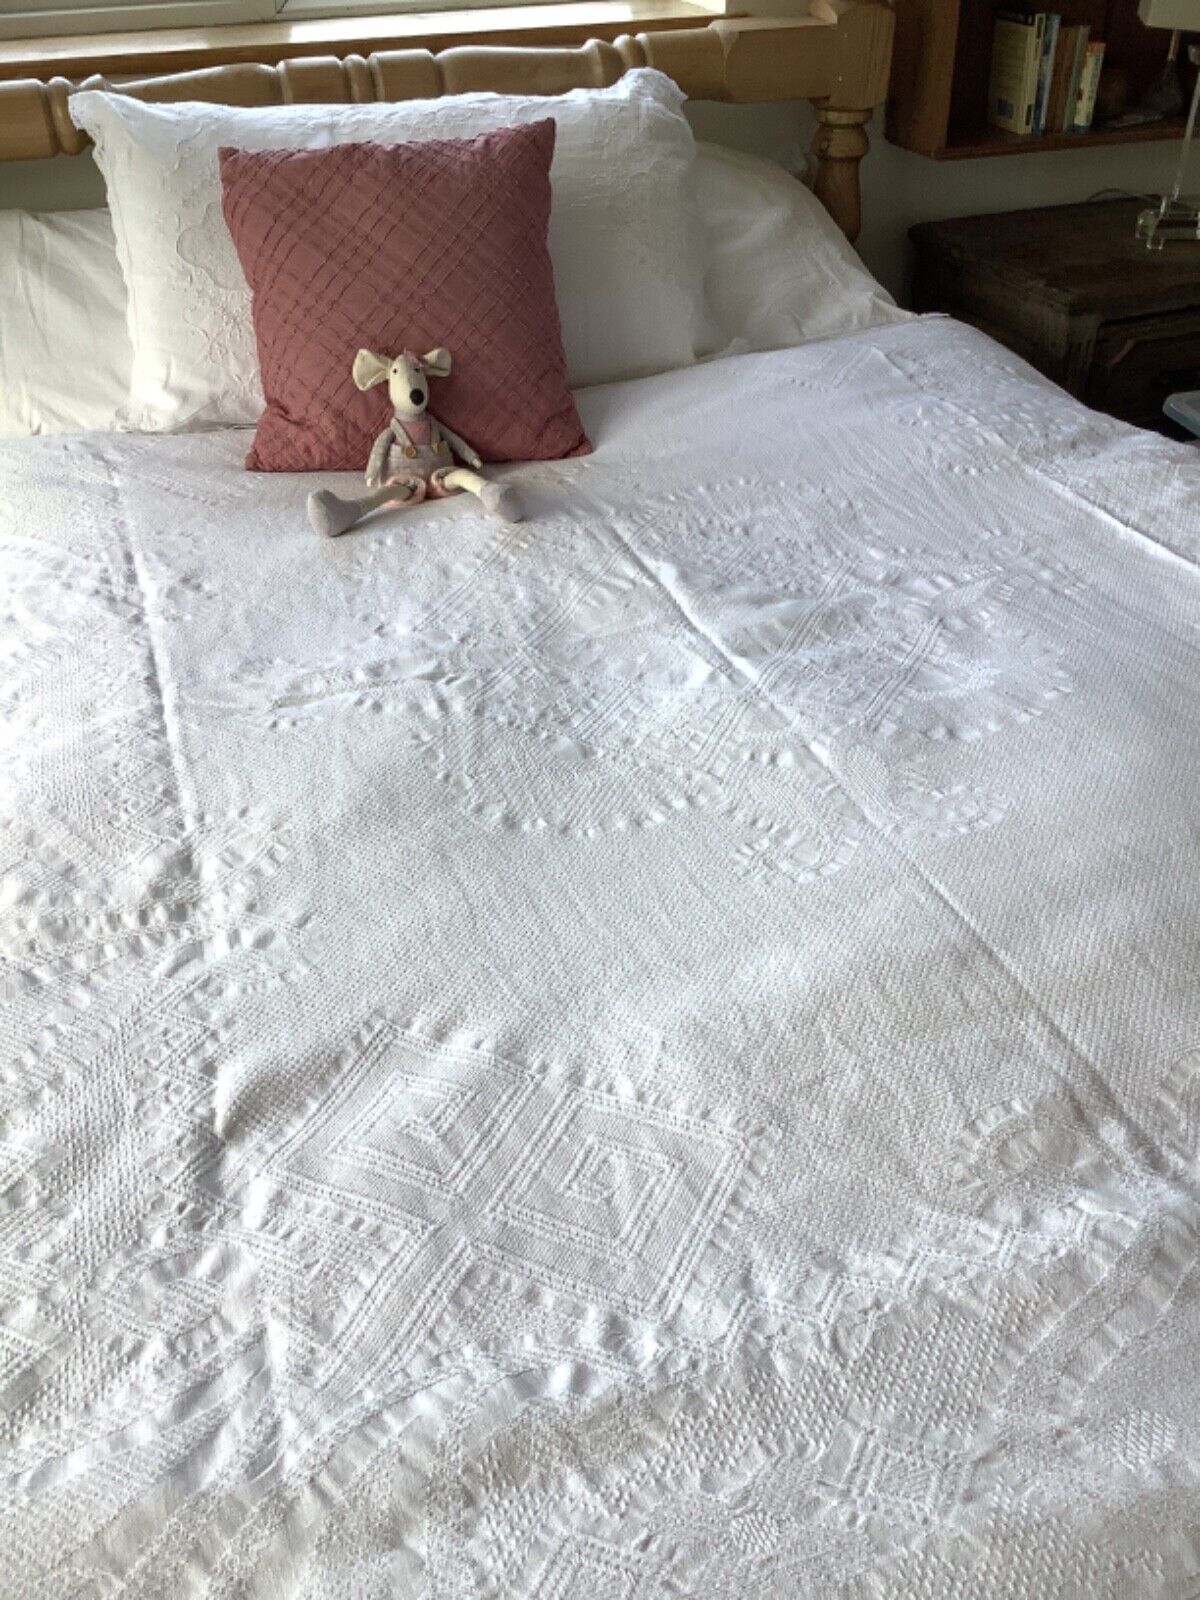 Vintage White Heavy Woven Cotton Jacquard Bedspread early 1900s 215 x 185cm wide